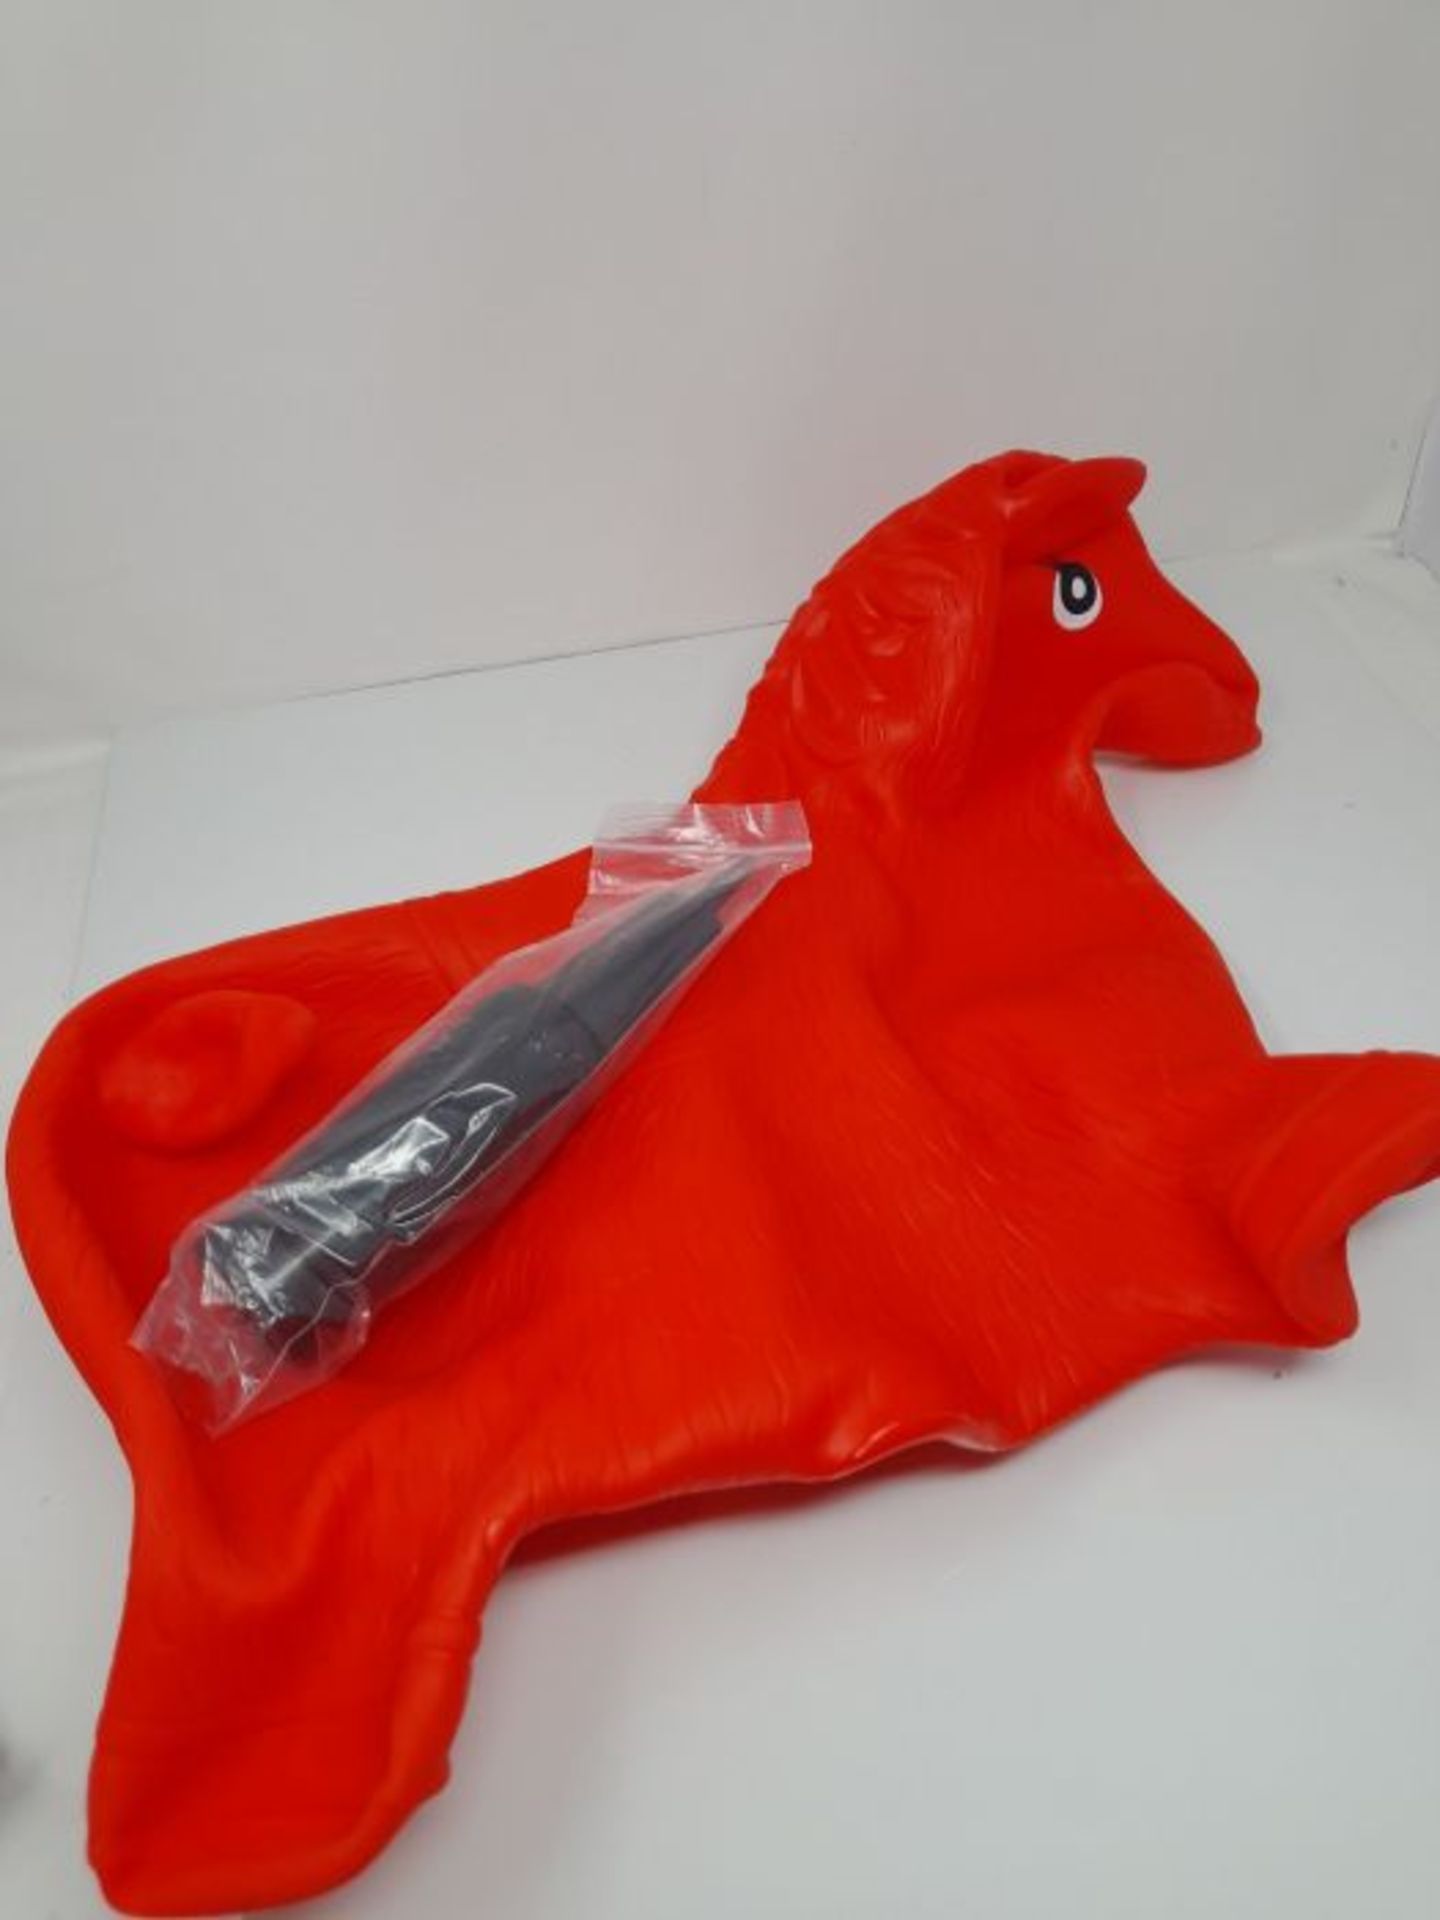 Relaxdays 10024991_47 Hopping Horse, Air Pump Included, Up to 50 kg, BPA Space Hopper, - Image 2 of 2